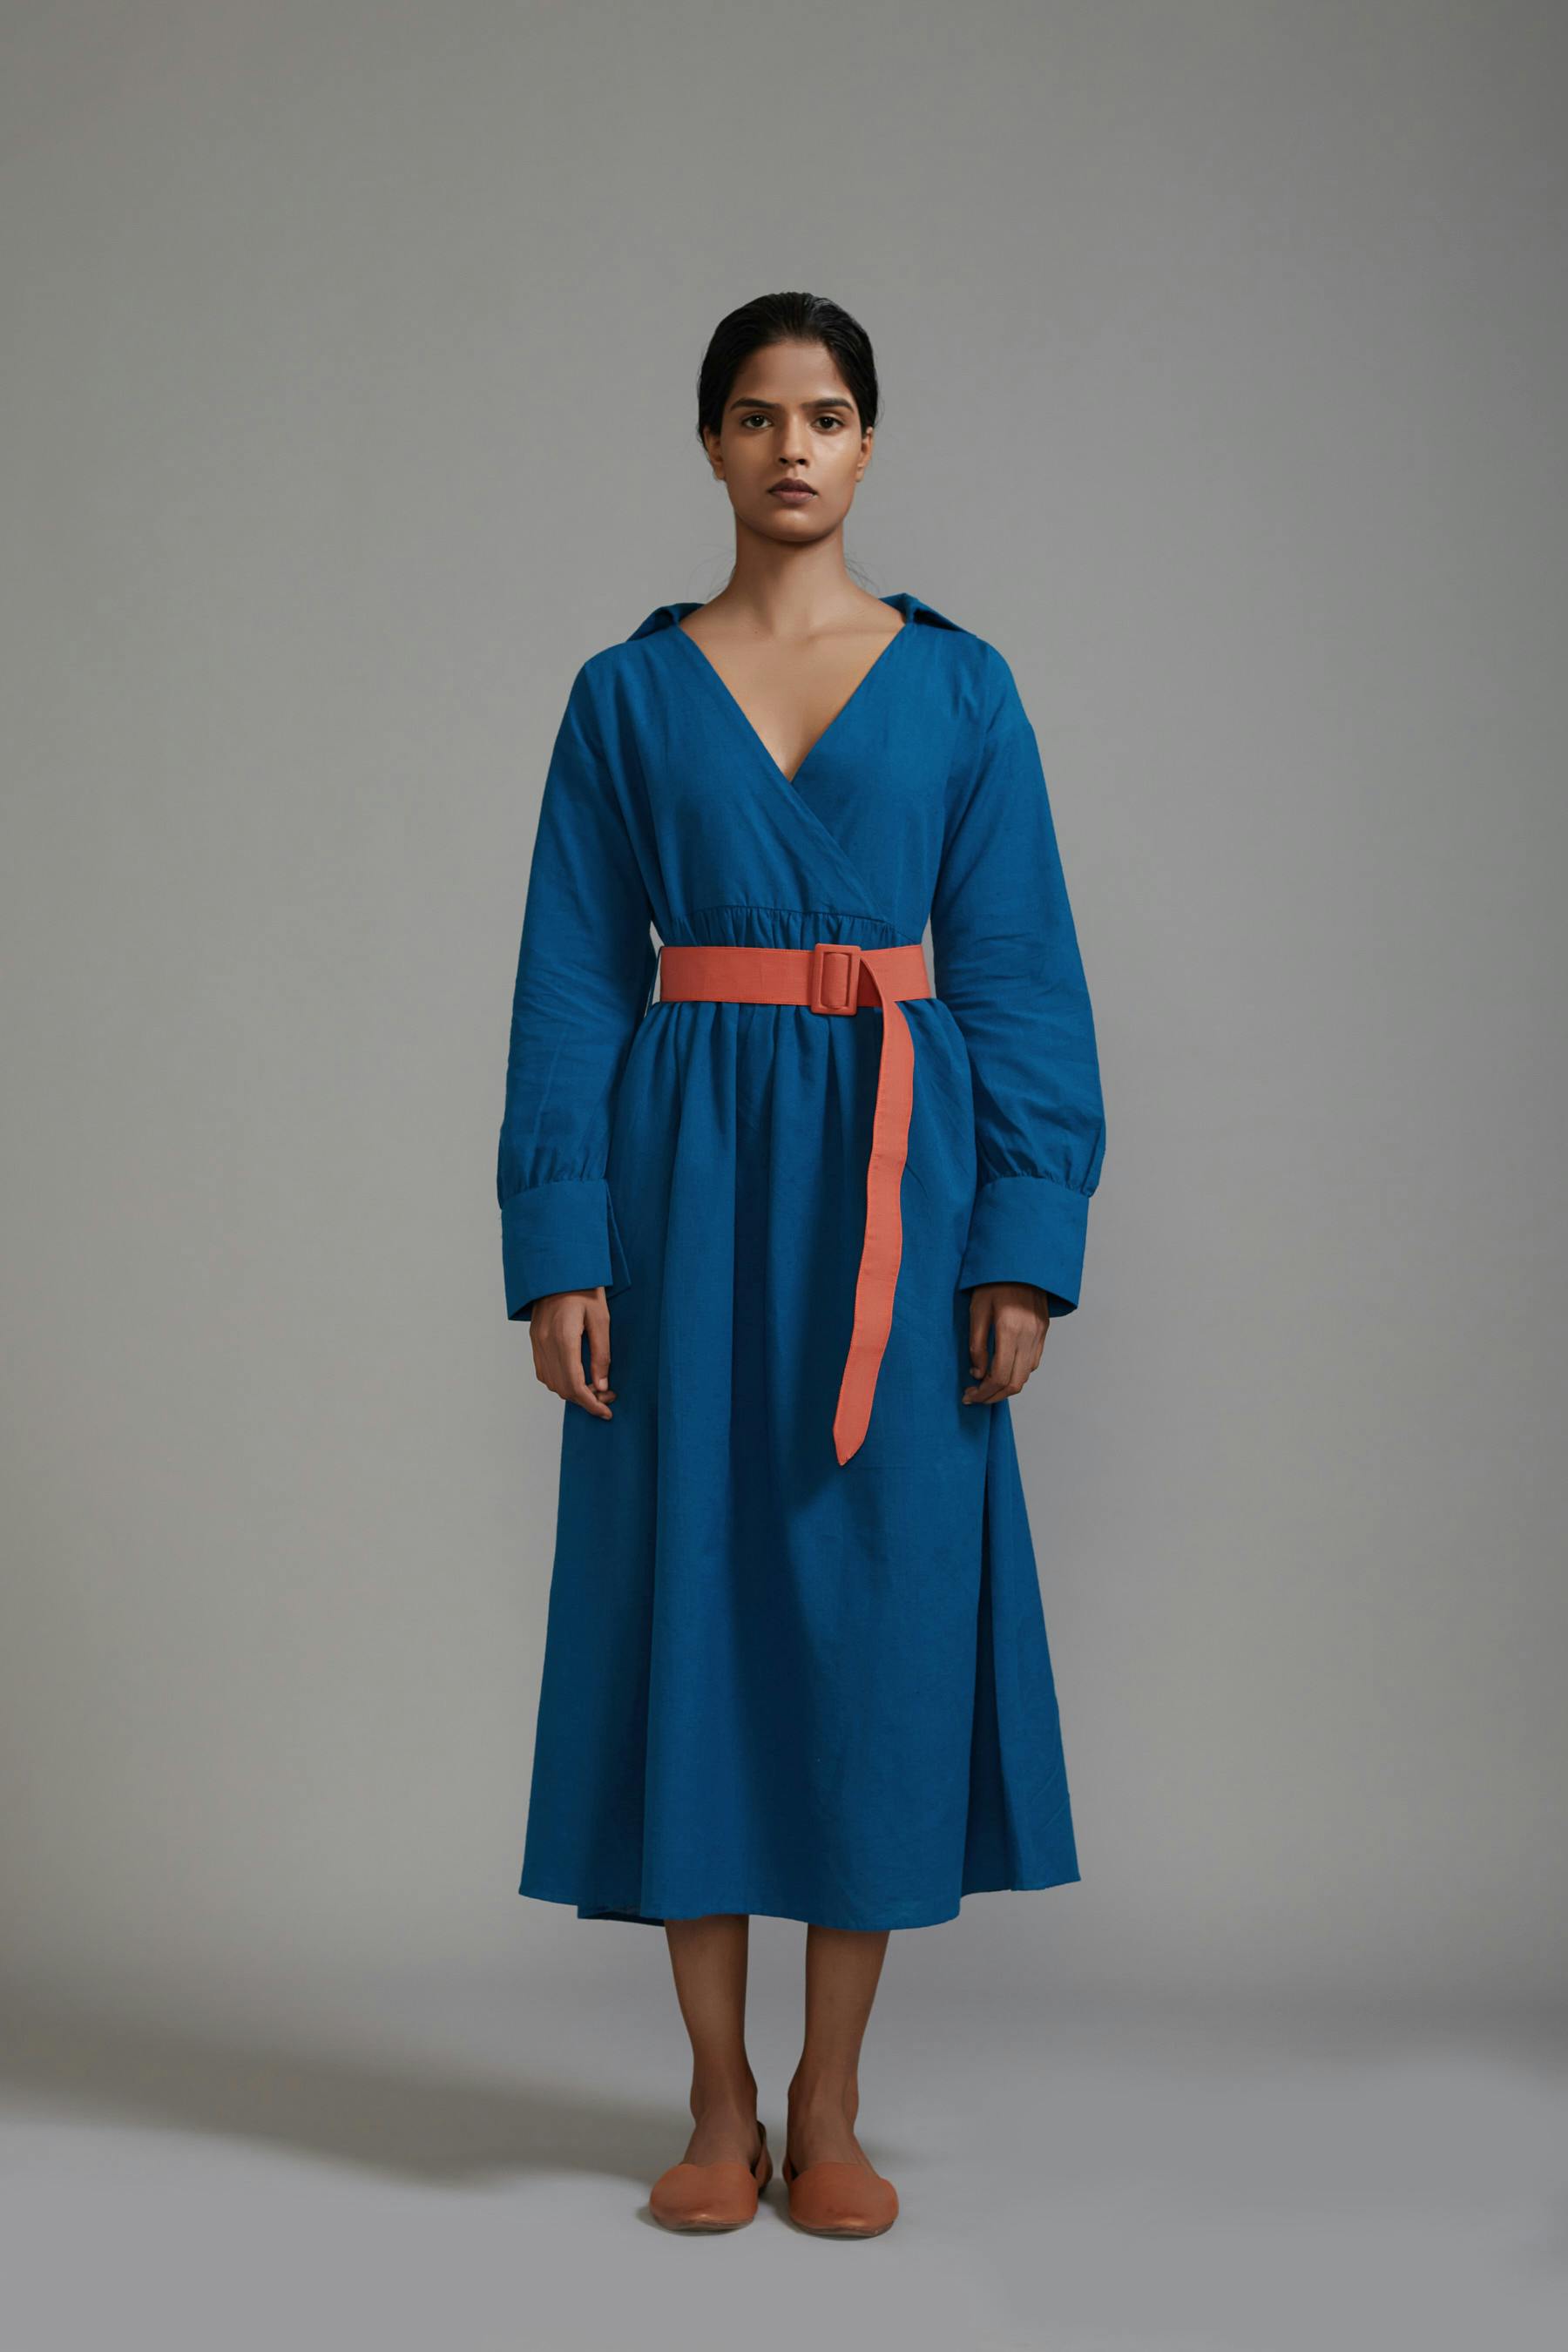 Blue Safari Belted Dress, a product by Style Mati